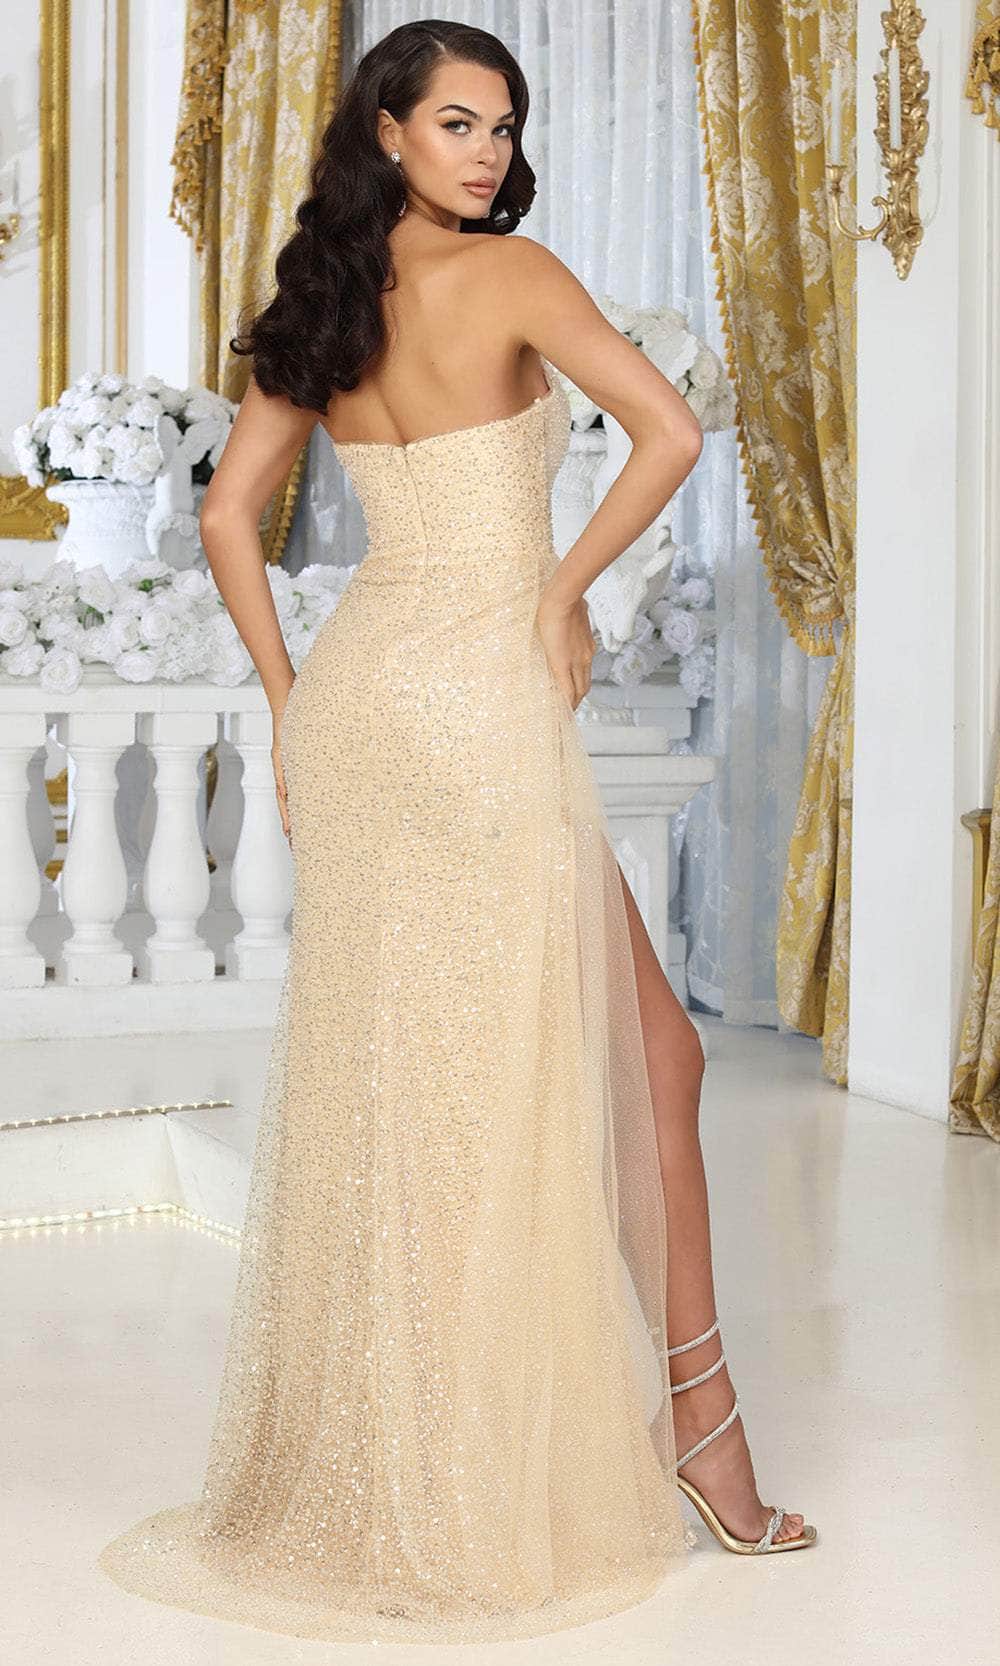 May Queen RQ8068 - Plunging Sheath Prom Gown Prom Dresses